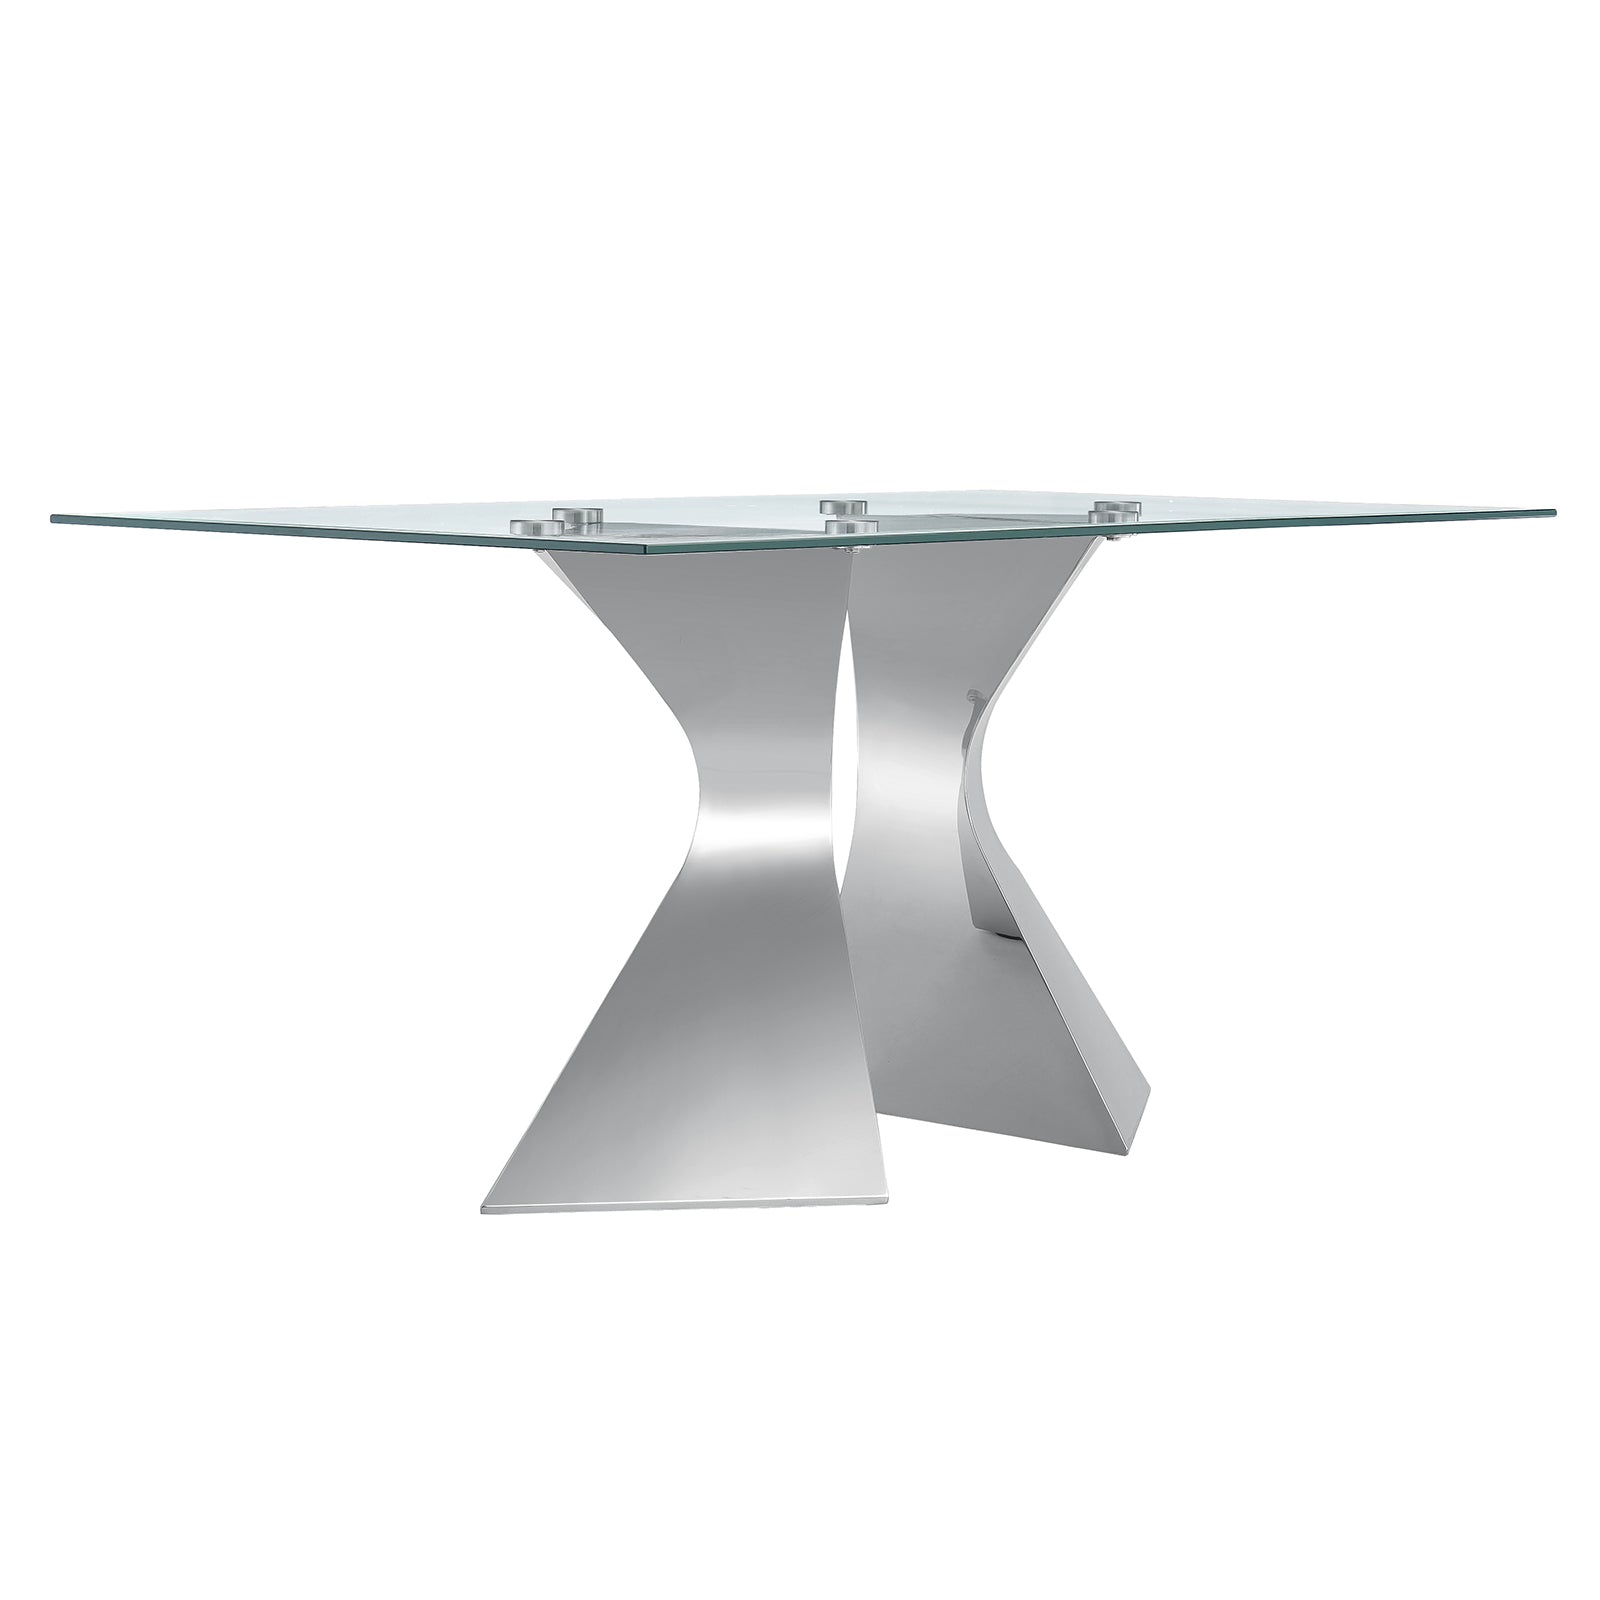 The Elegant Silver Glass Dining Table: Fusion of Style and Functionality